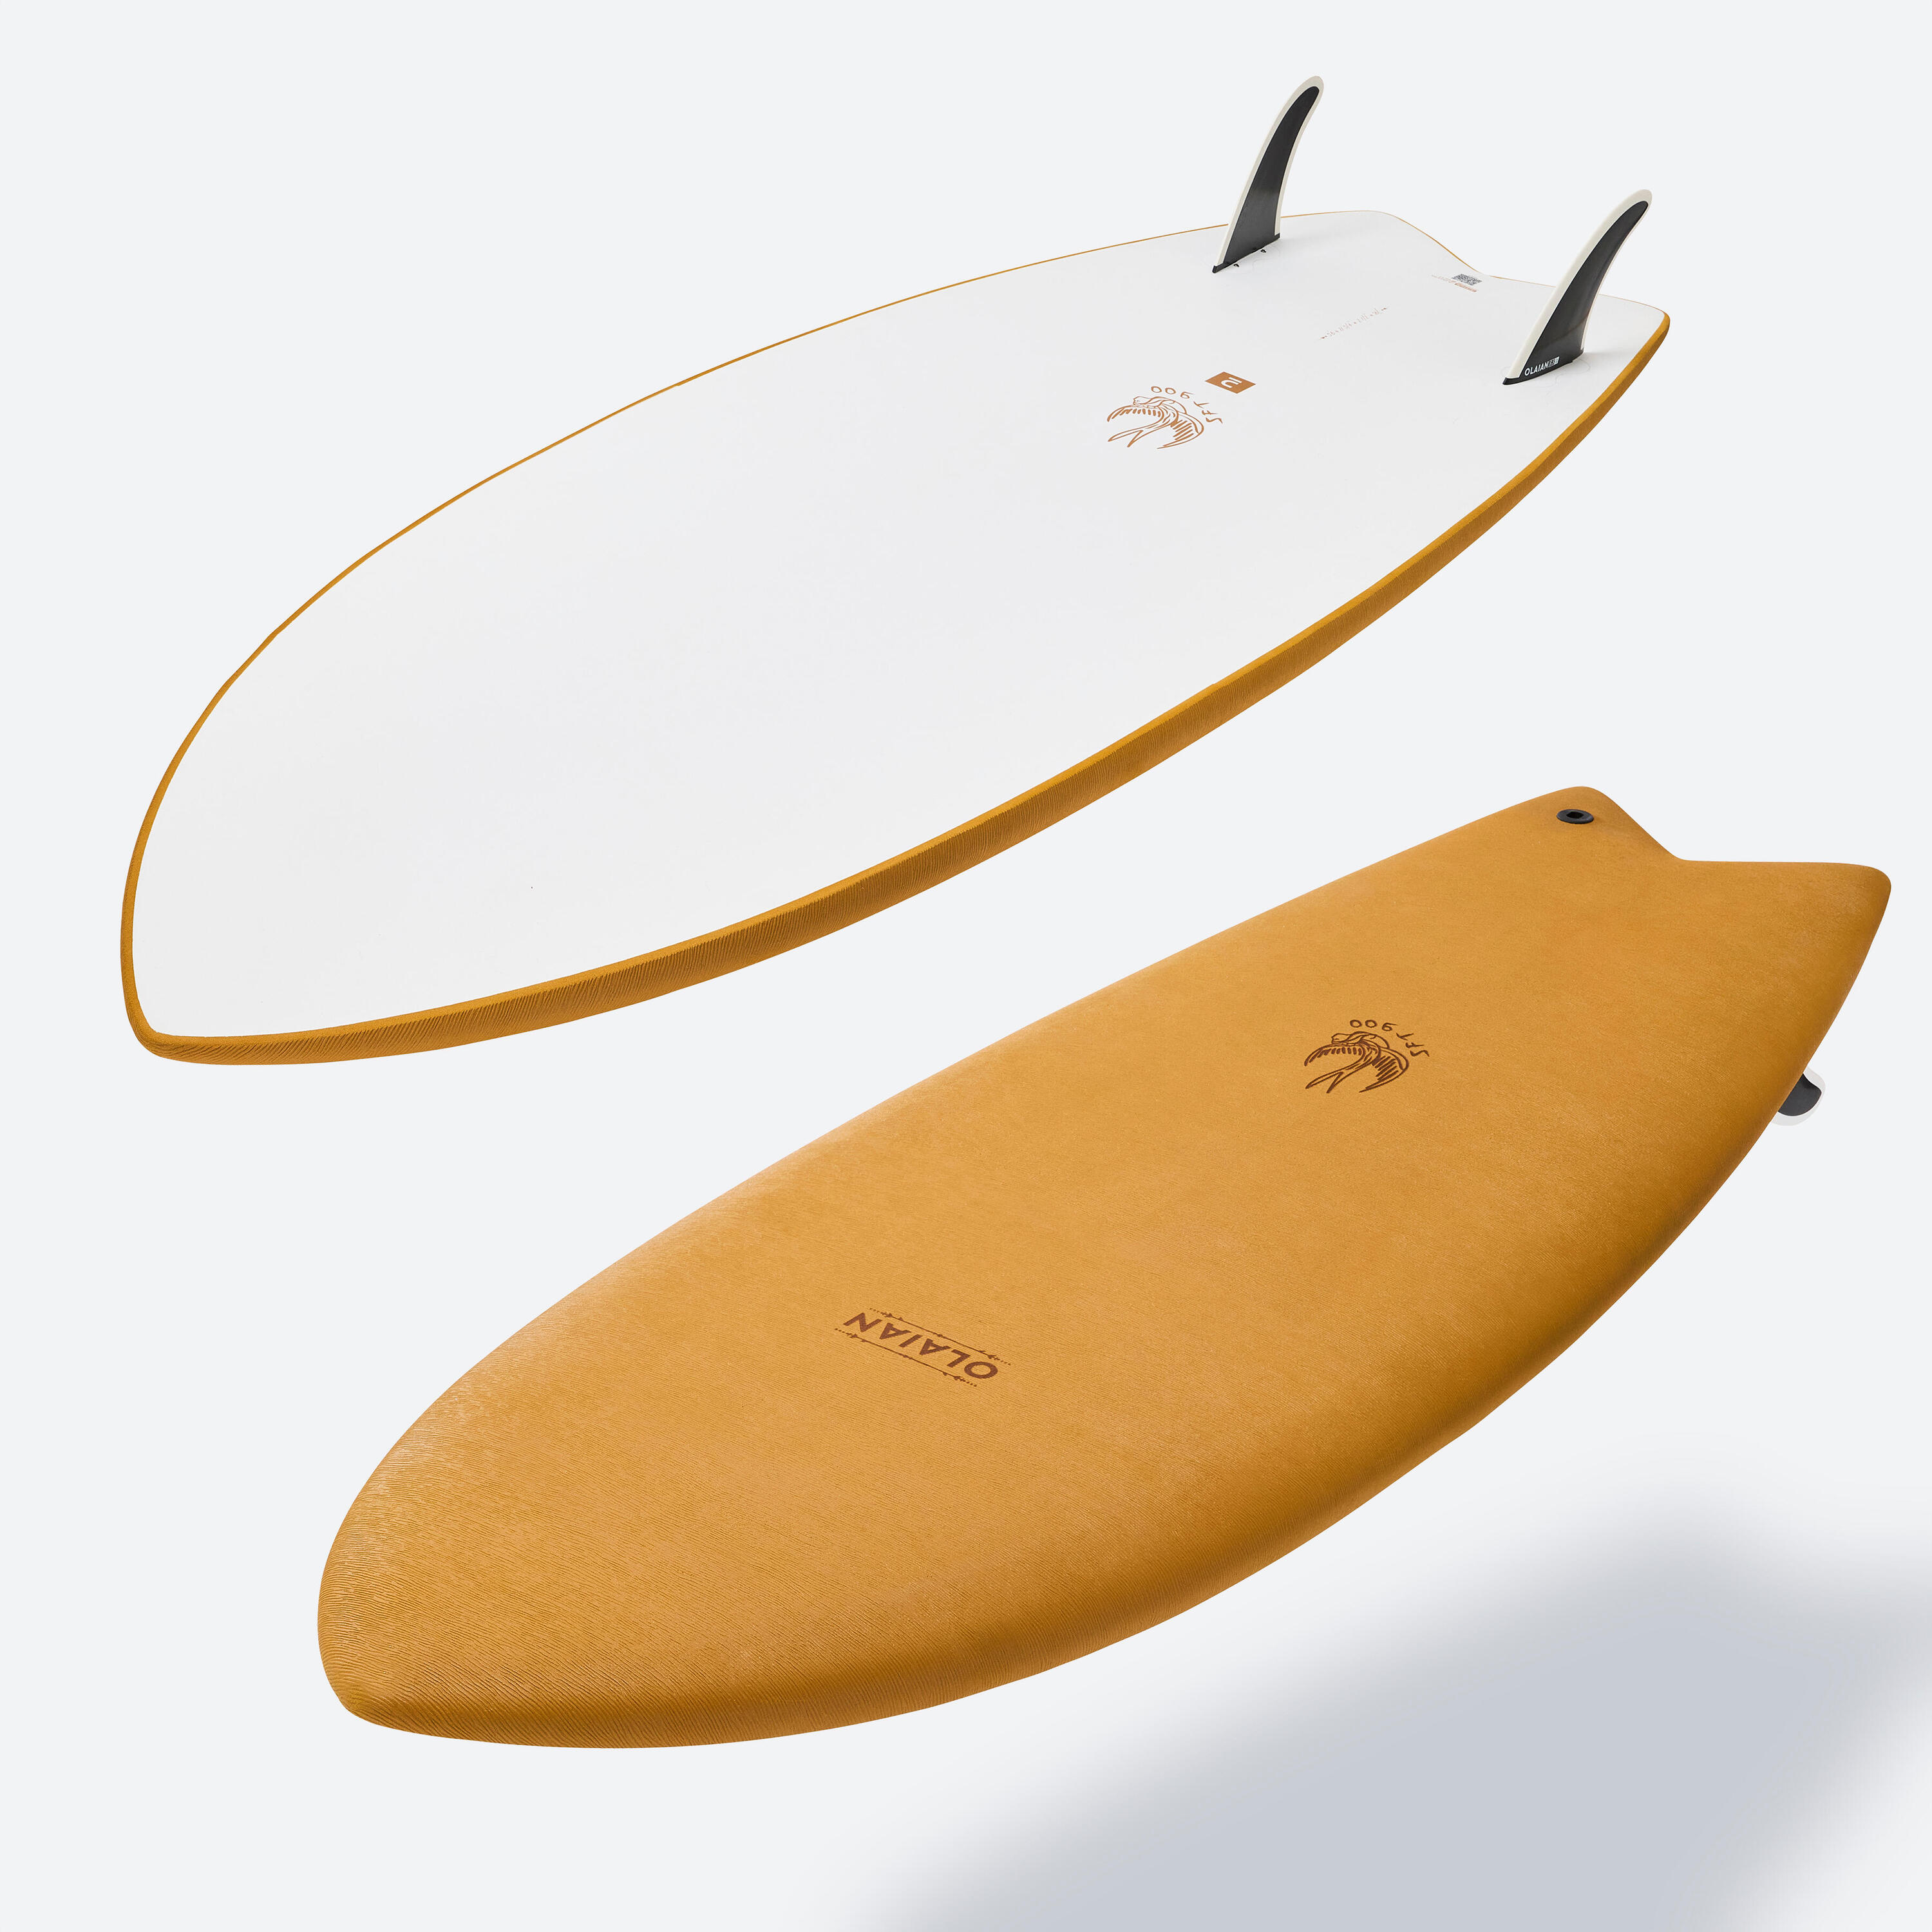 SURFBOARD 900 EPOXY SOFT 5'6 - Supplied with 2 fins 13/13